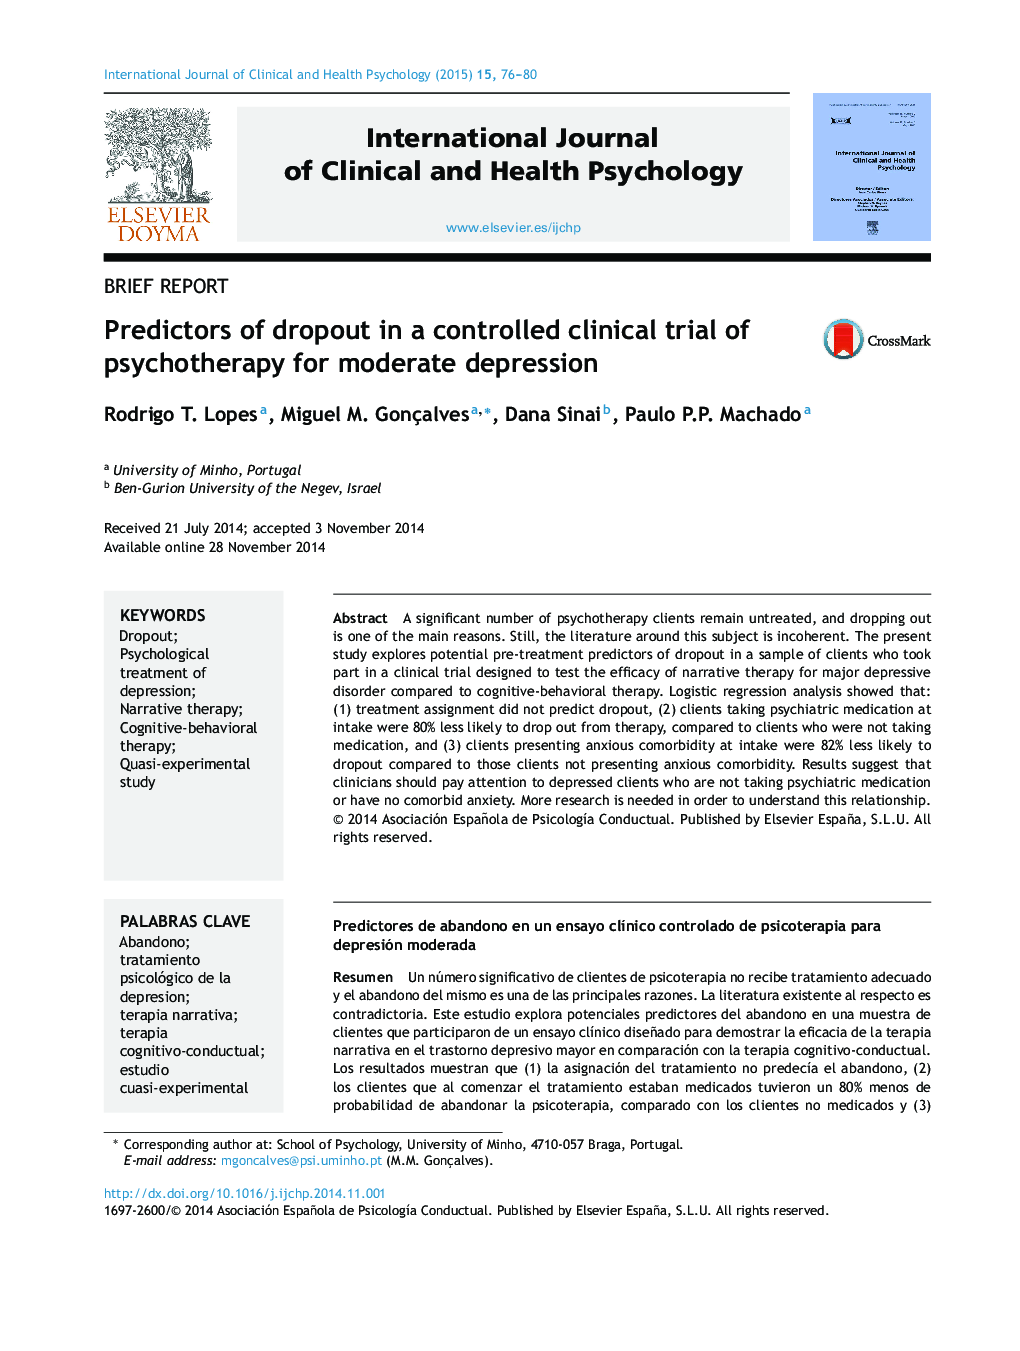 Predictors of dropout in a controlled clinical trial of psychotherapy for moderate depression 